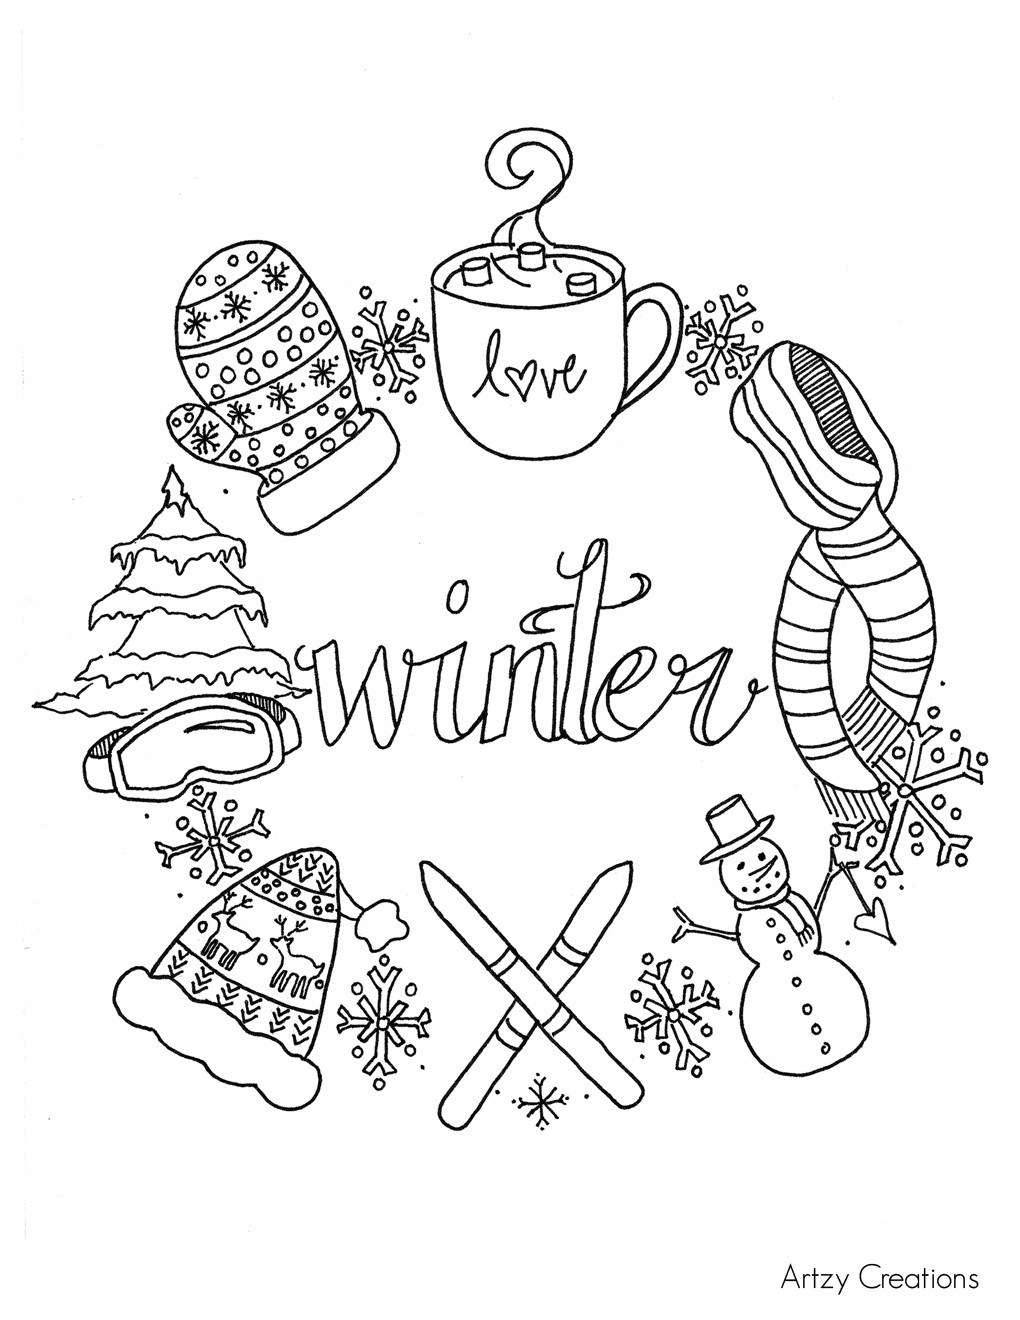 Winter Coloring Sheets Free Printable
 Free Winter Coloring Page artzycreations